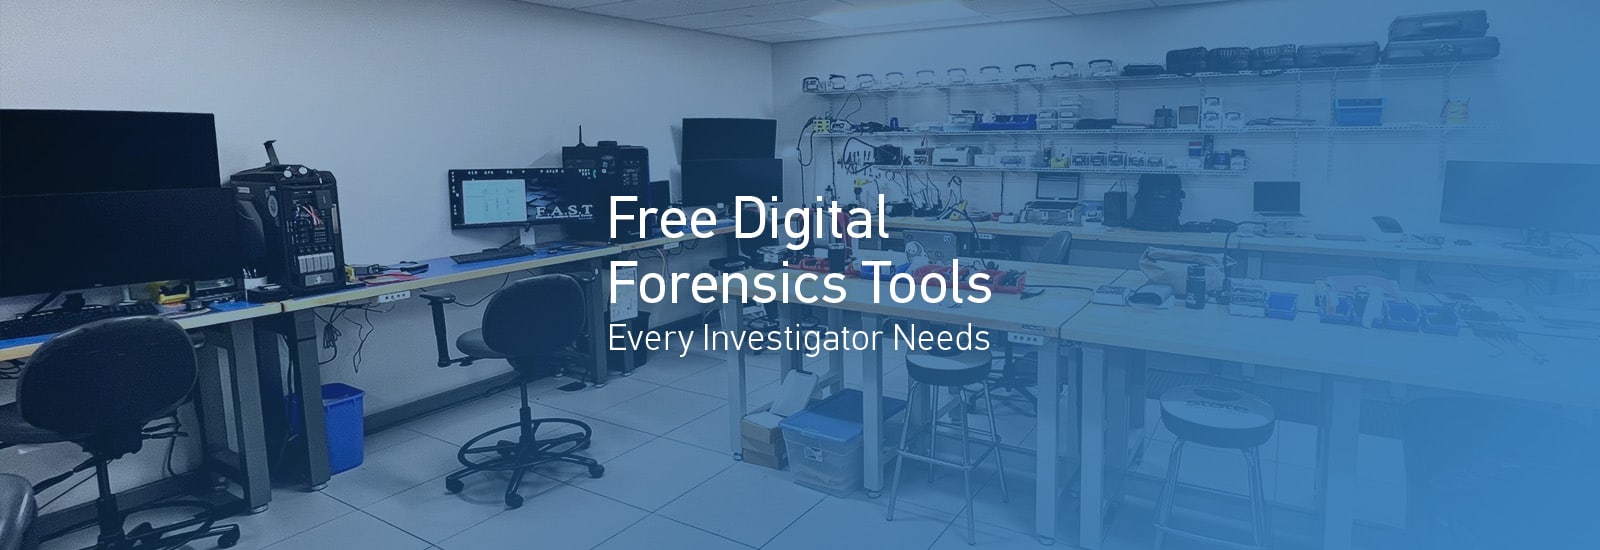 A decorative header for the Free Digital Forensics Tools post